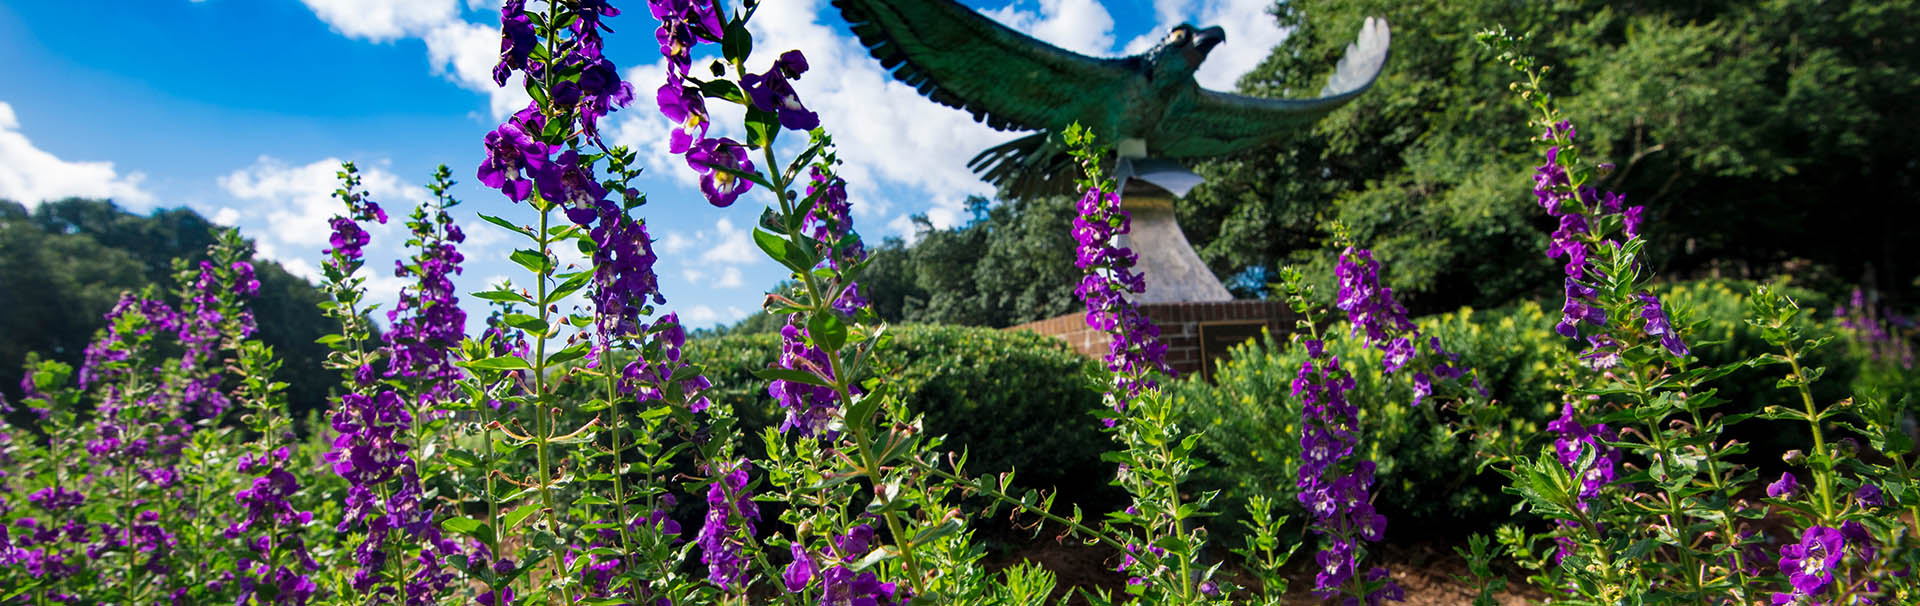 Seahawk statue surrounded by a garden of purple flowers.